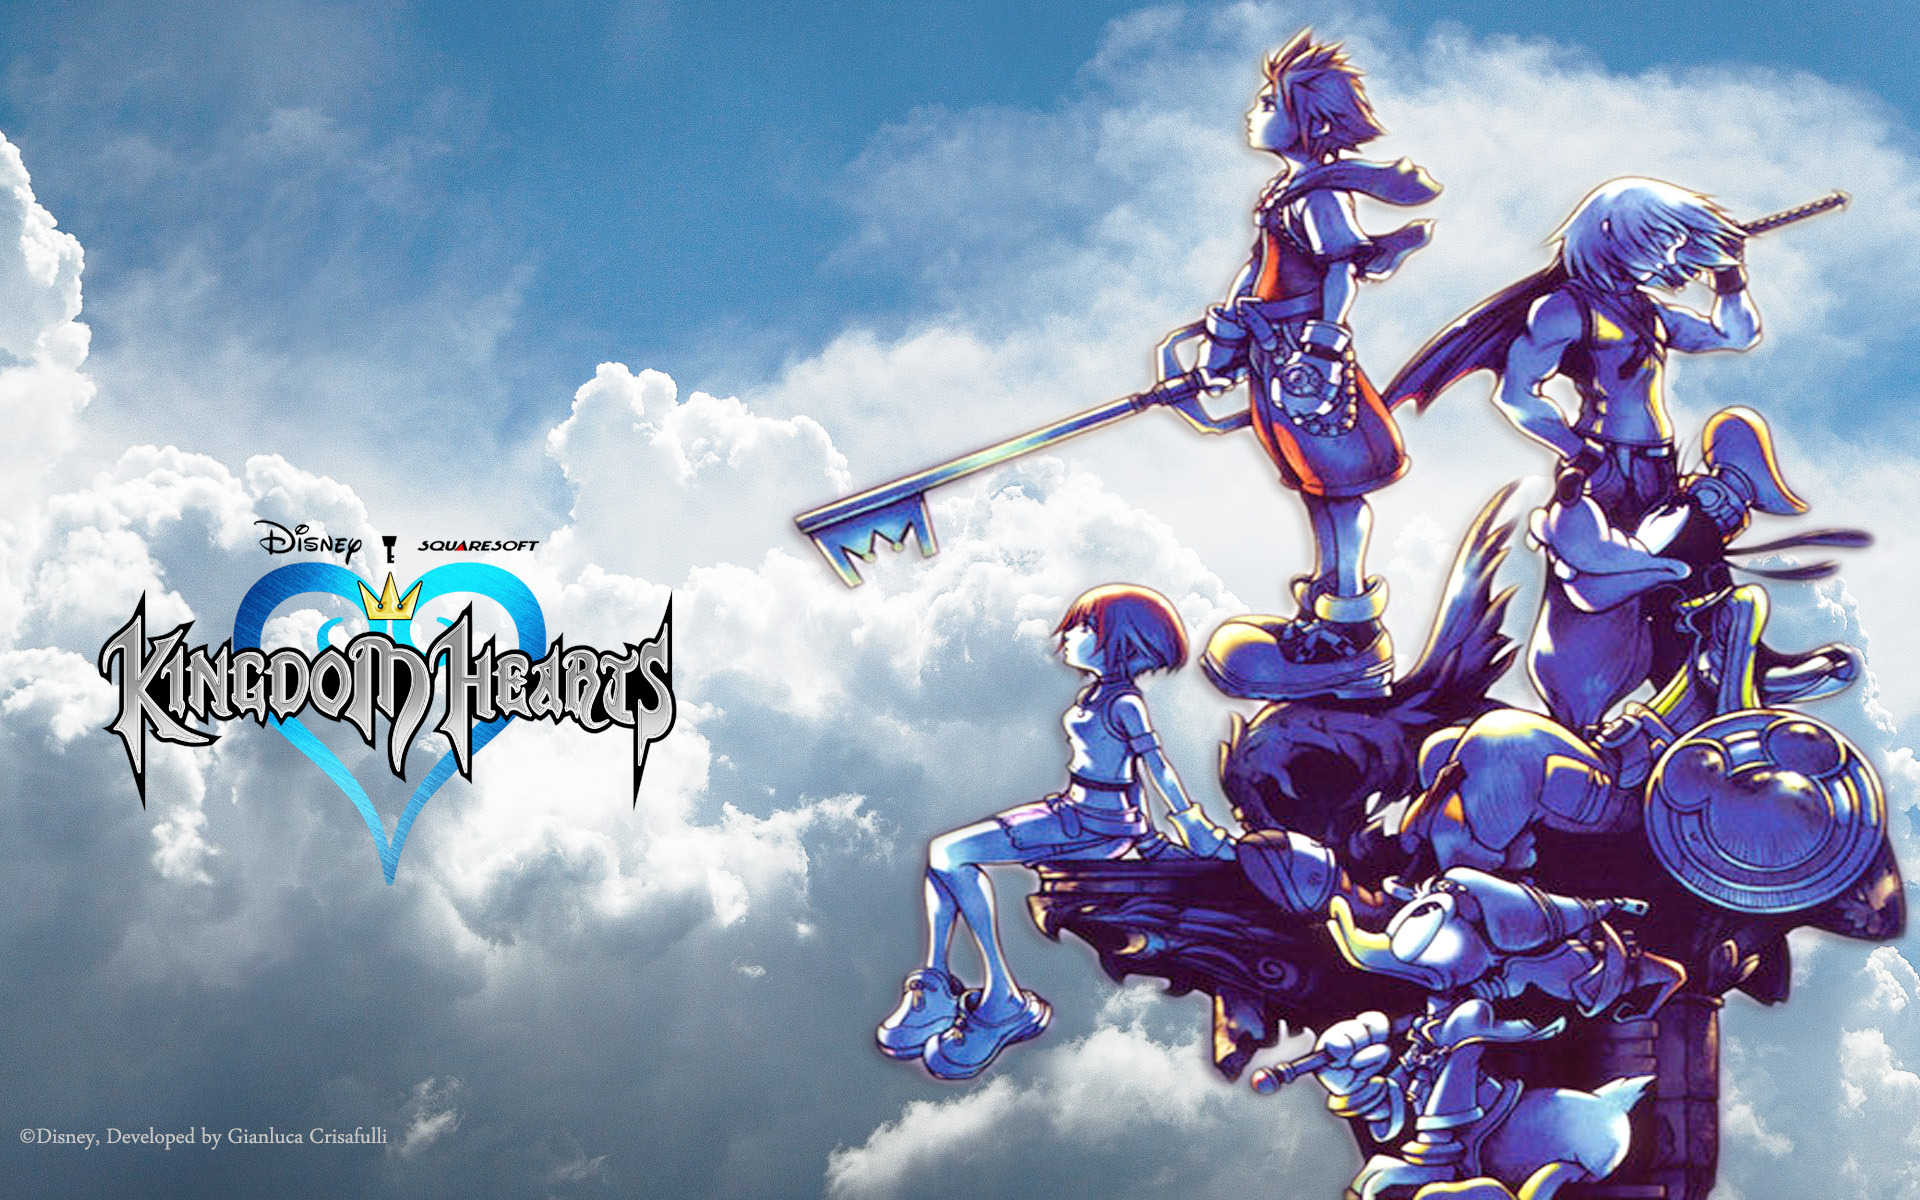 The Daily Crate | The 'Kingdom Hearts' Worlds That Almost Made Us Break Our Controllers